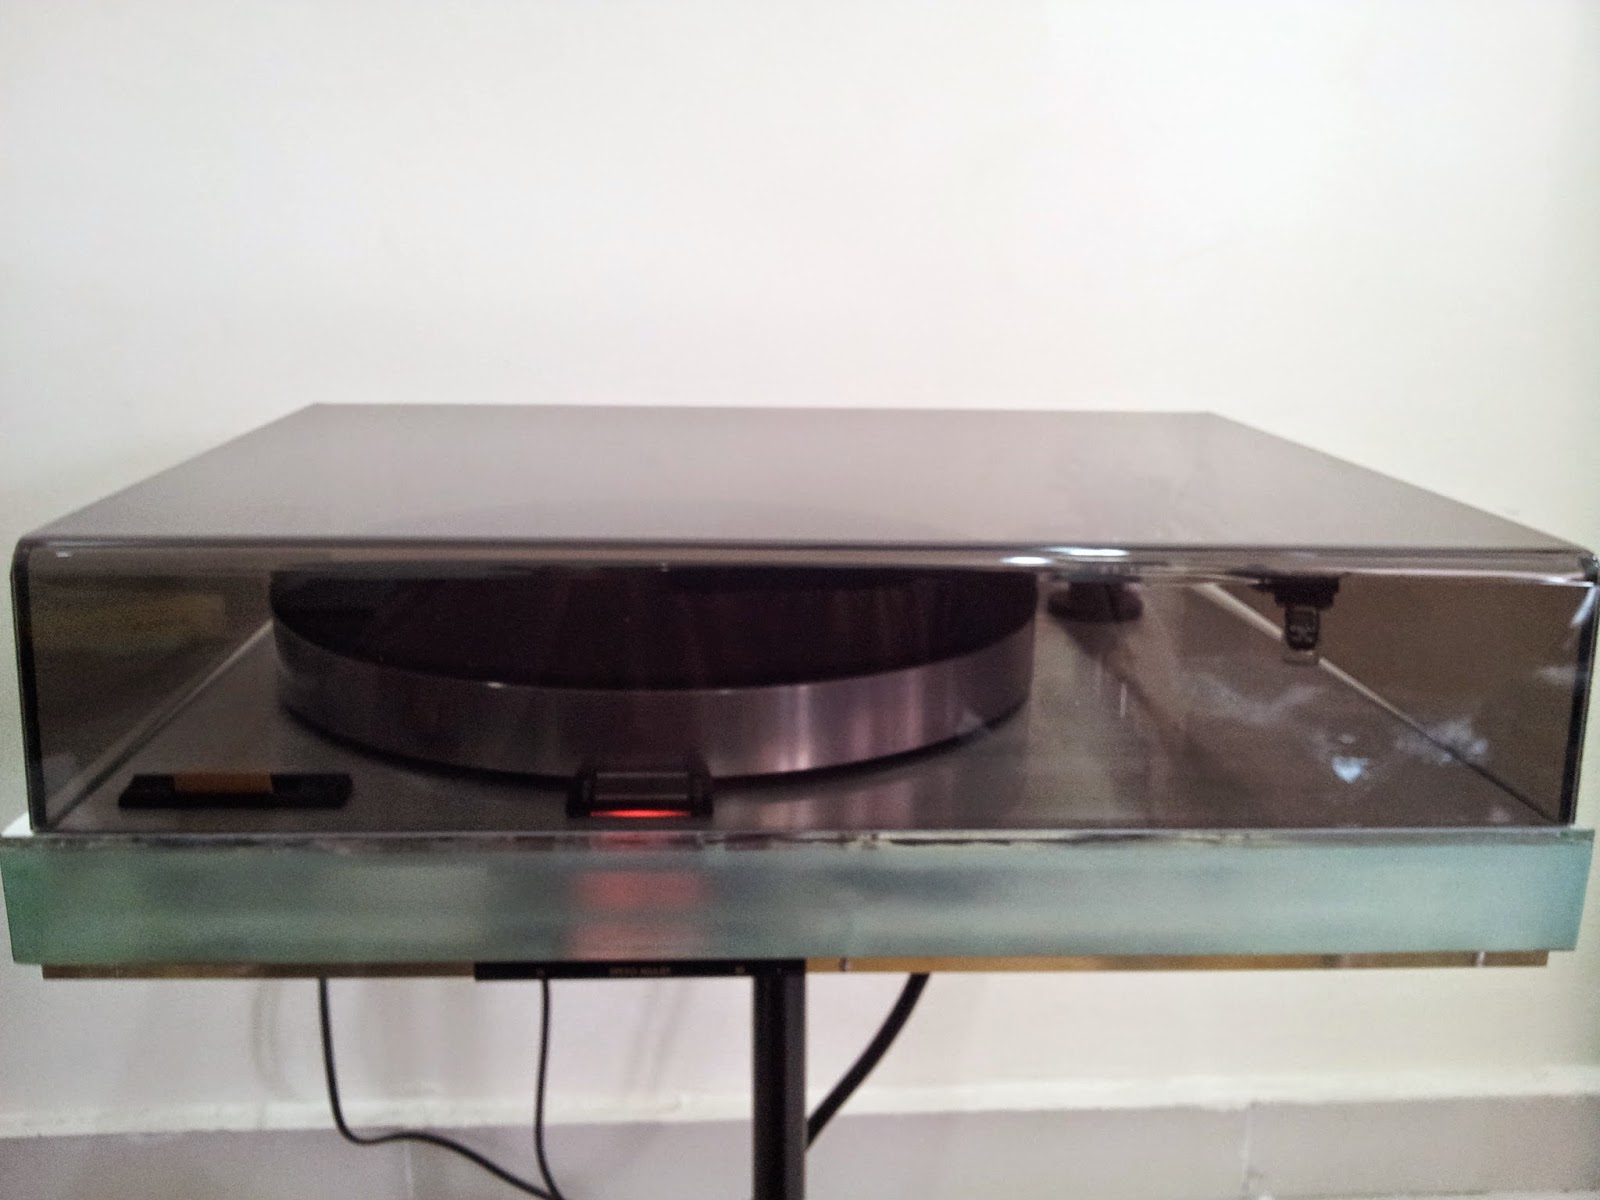 Luxman PD-272 Turntable with ADC LMF-2 ToneArm and QLM 36 MKIII Cartridge (Used) 20140806_163502